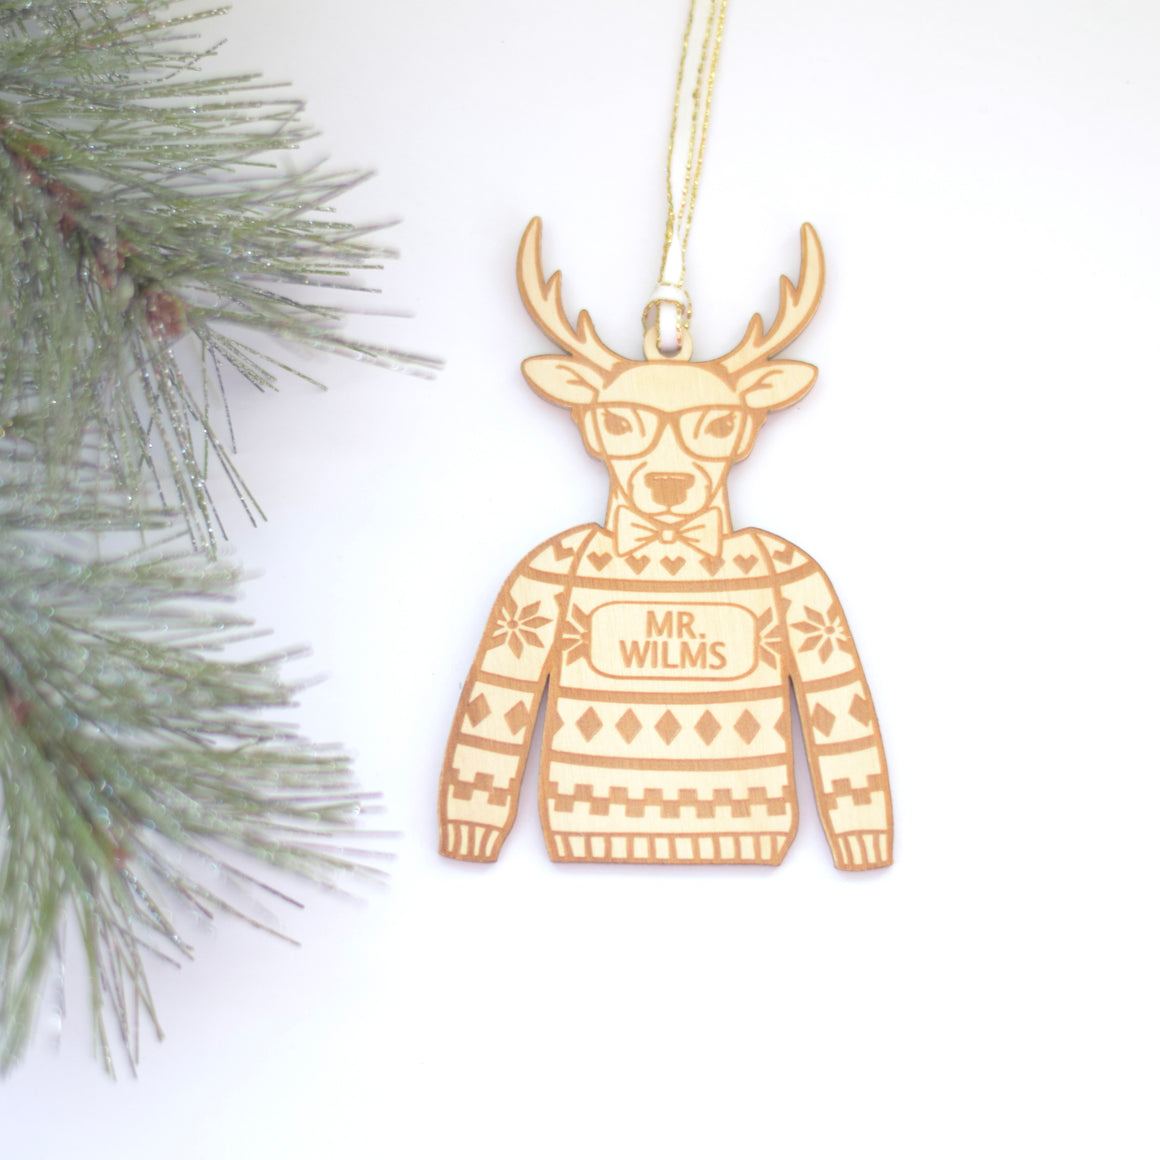 Personalized Ornament for Teacher Gift with ugly Christmas Sweater and Deer